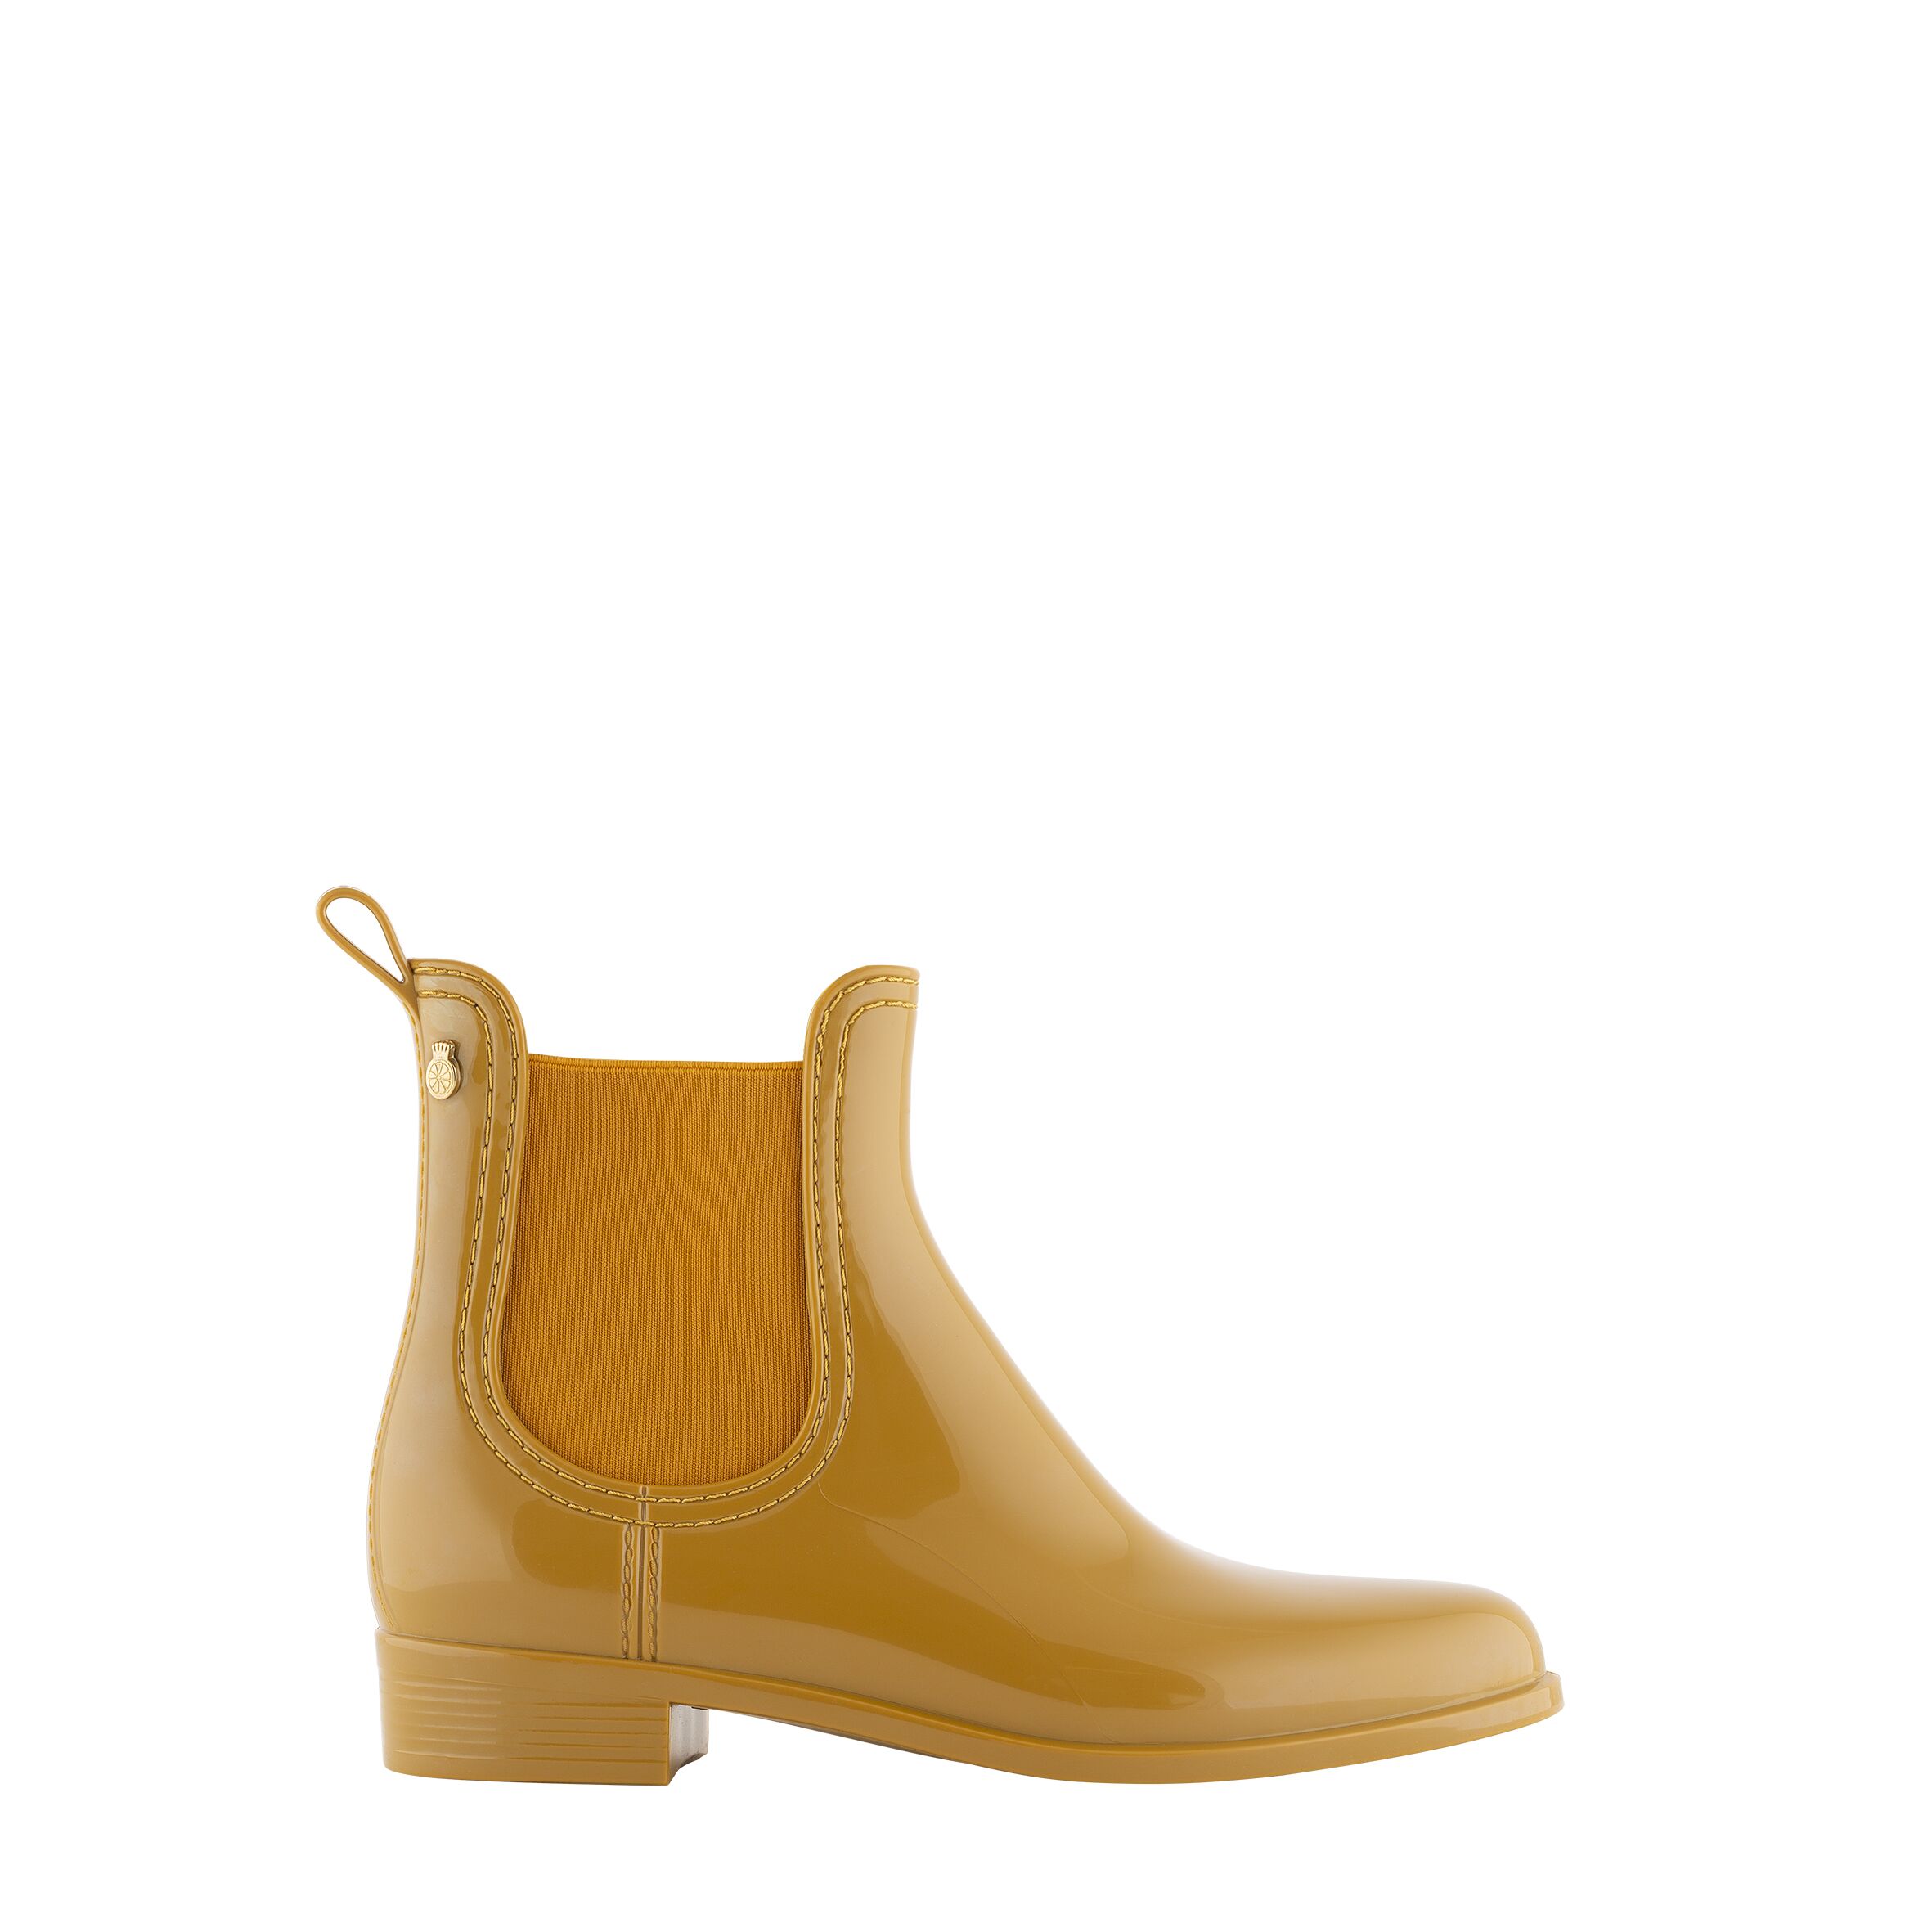 Comfy, Rusted Gold, Lemon Jelly, €69.90